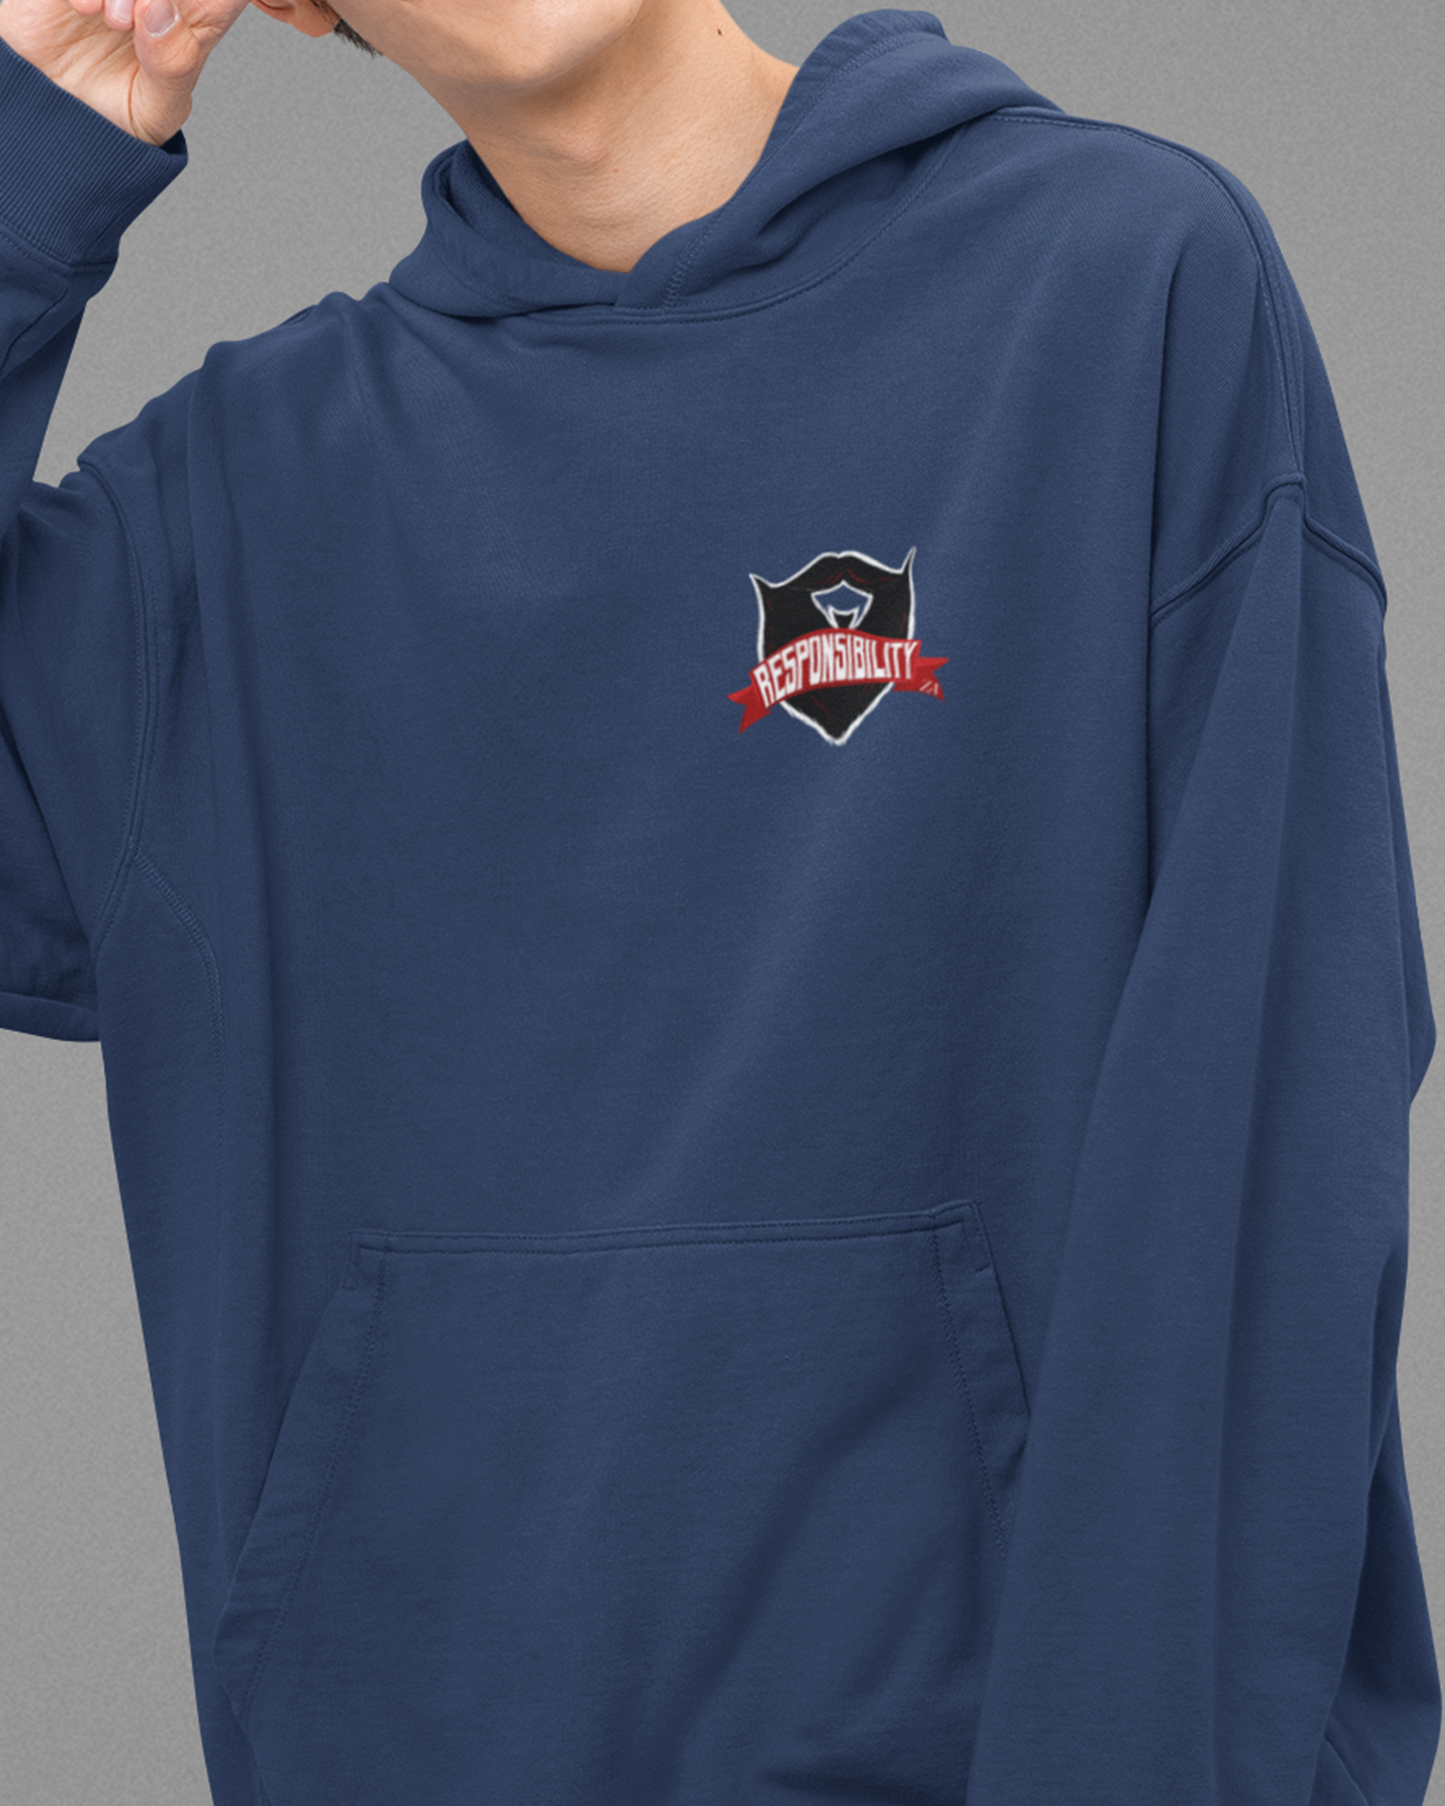 With Great Beard Comes Great Responsibility Hoodie